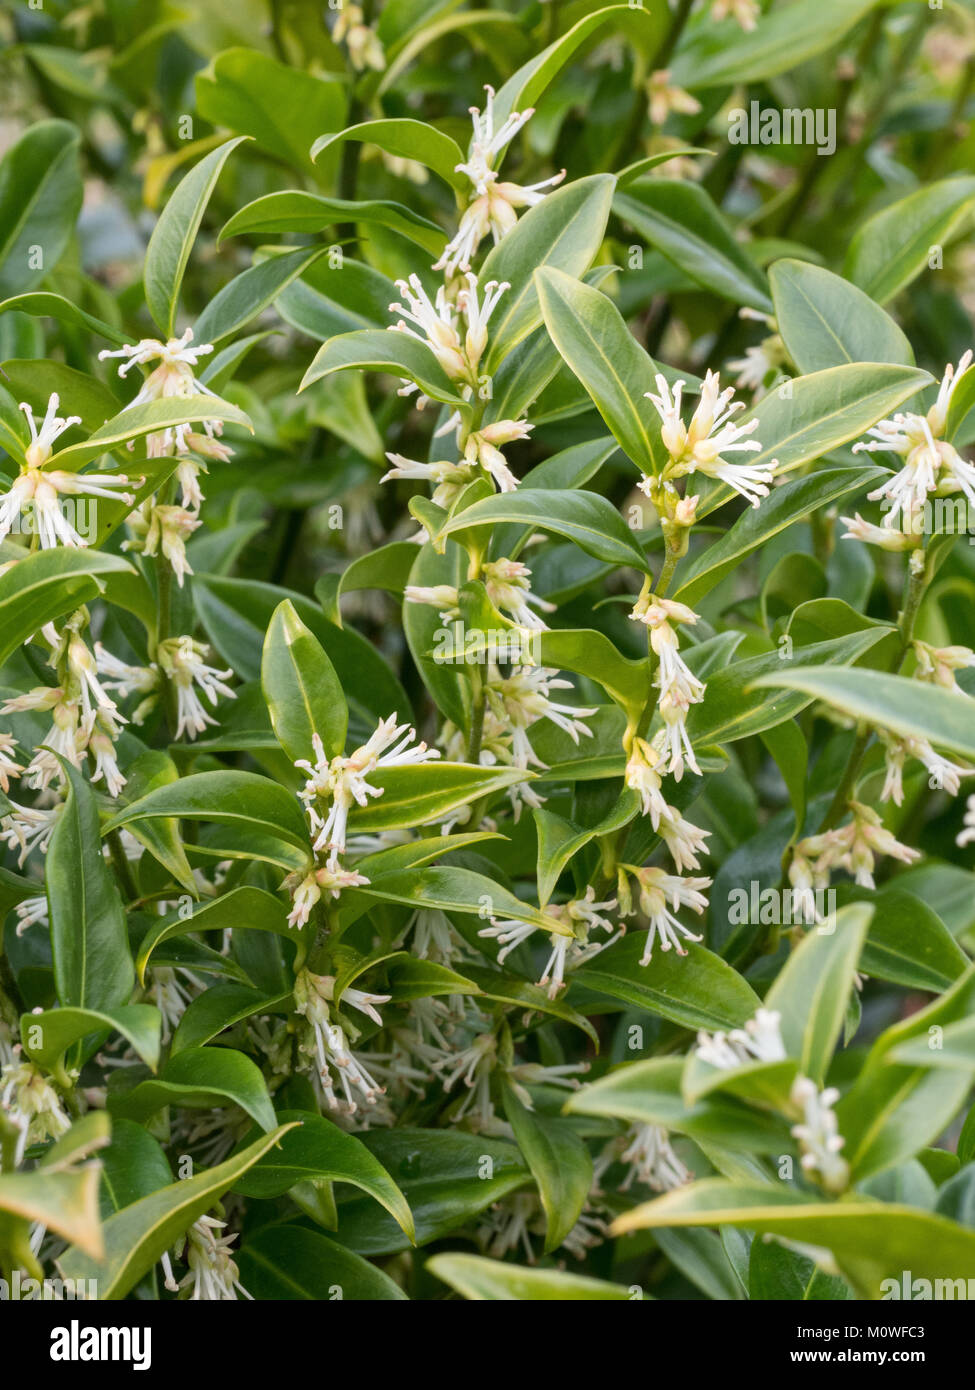 White flowers on the evergreen foliage of Sarcocca confusa Stock Photo